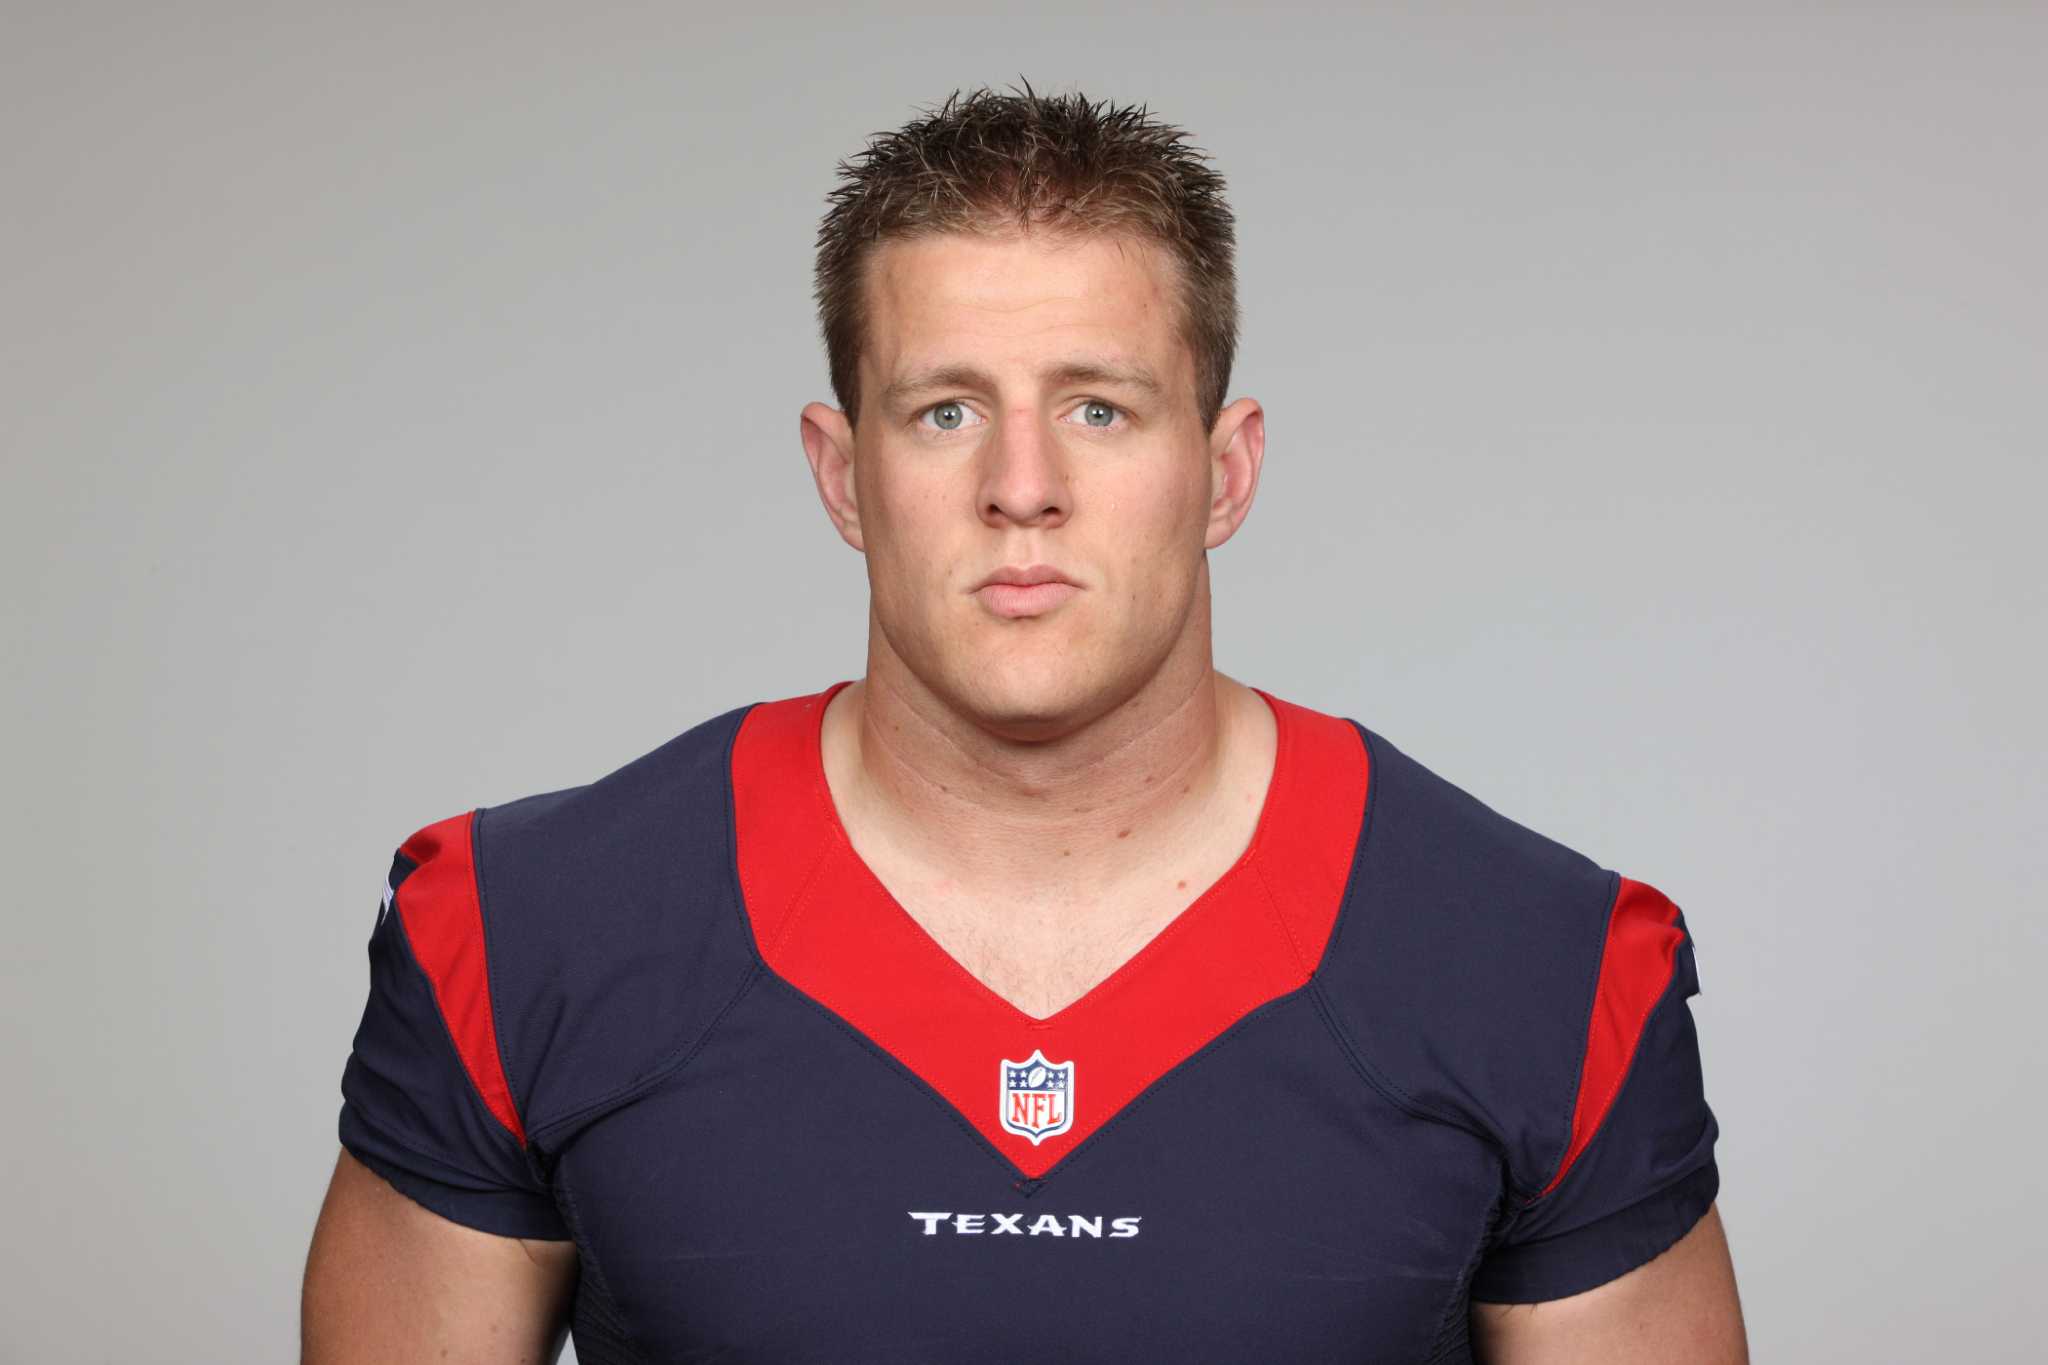 Texans' Watt turns out to be a natural for TV ads, ESPN promo